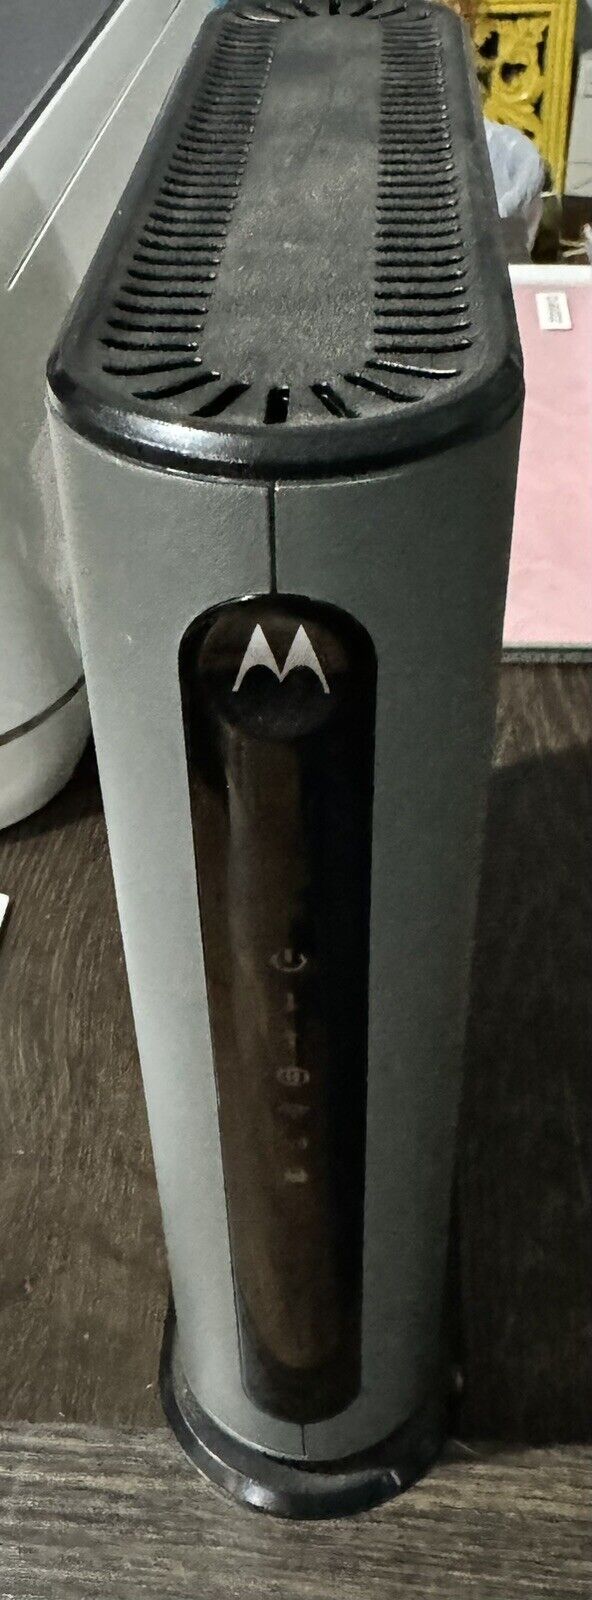 Motorola MG7700 Modem Plus AC1900 WiFi Router Combo with Power Boost  1000+ MBPS